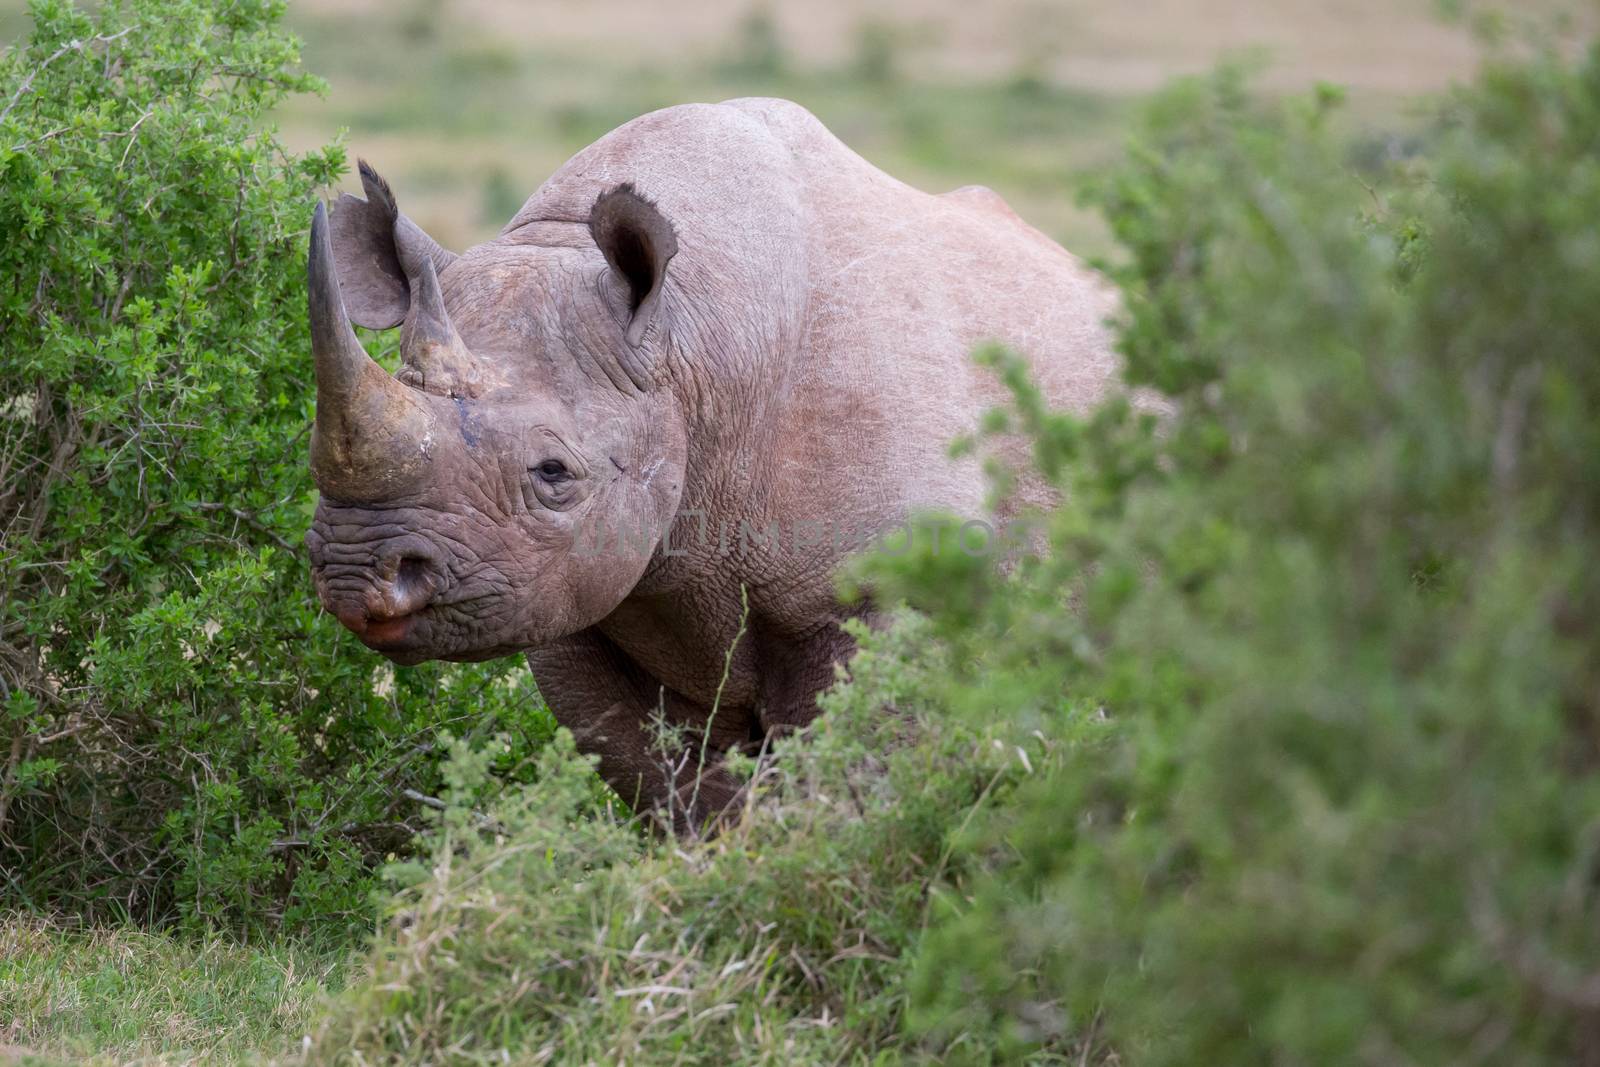 Large male black rhino peering out from between the bushes